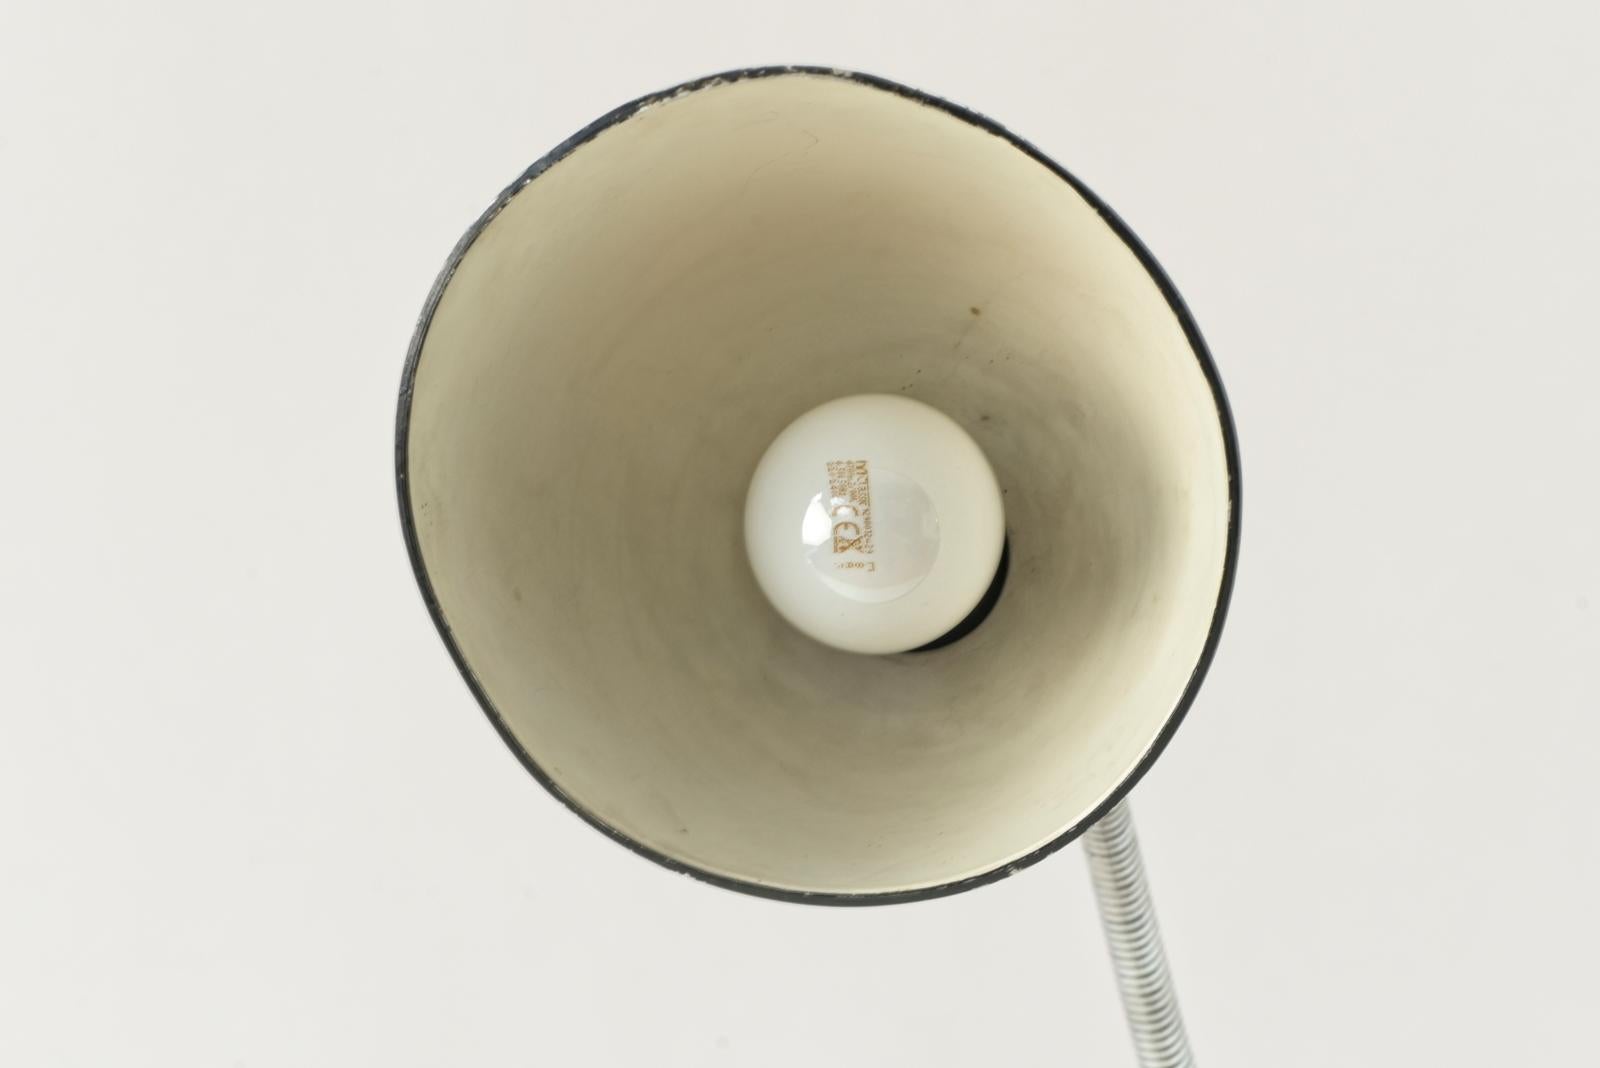 Floor Lamp by Christian Dell for Belmag, Switzerland - 1928 For Sale 8